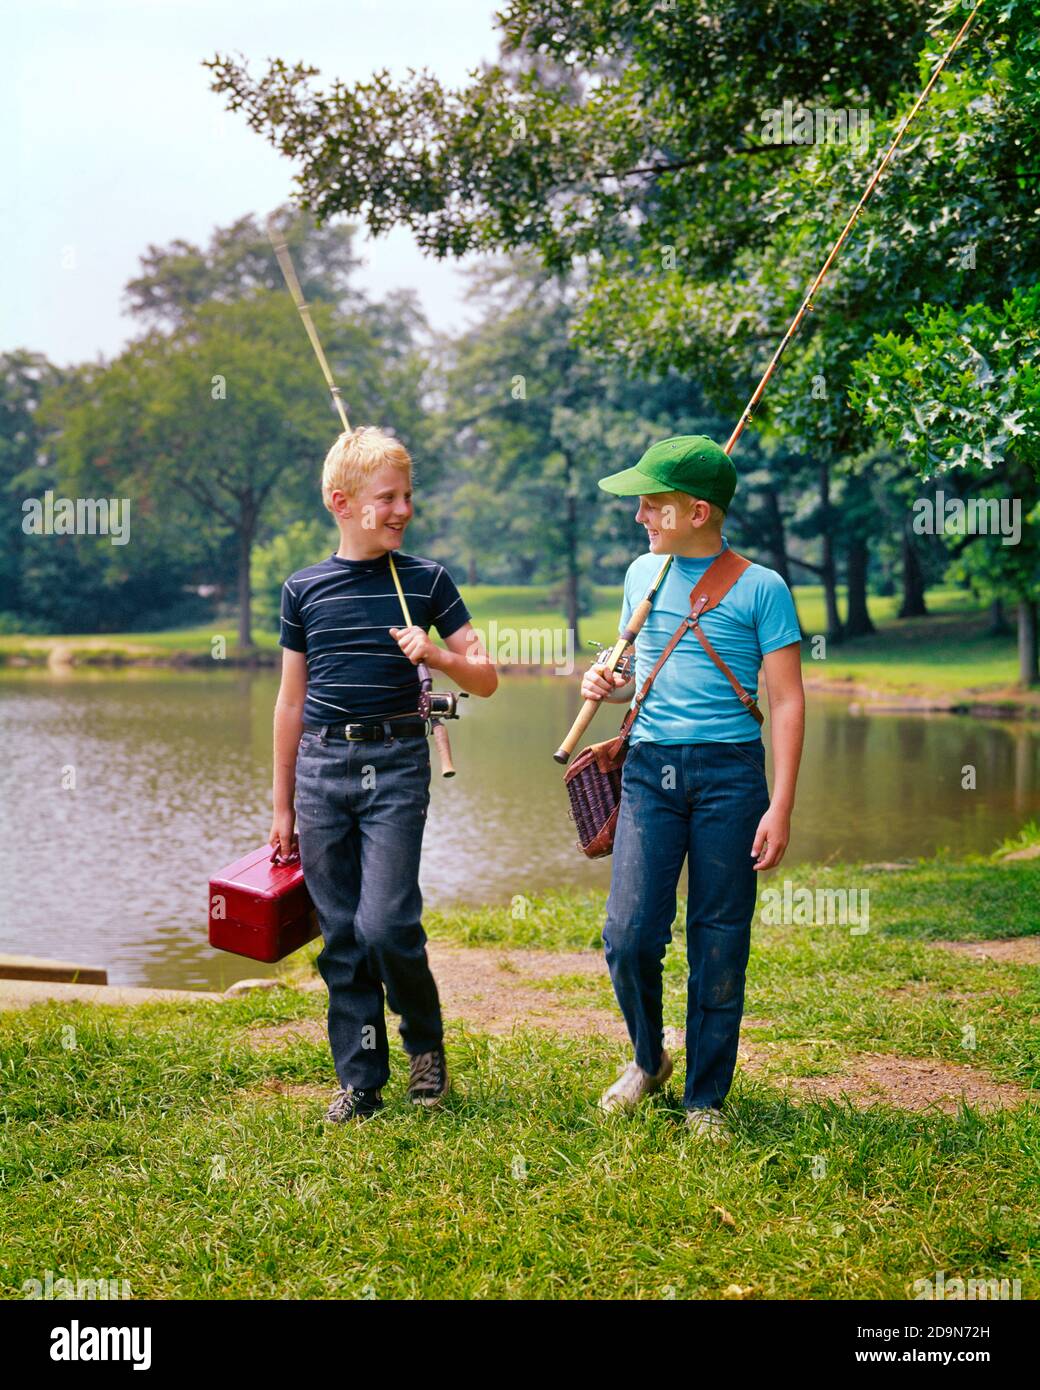 https://c8.alamy.com/comp/2D9N72H/1970s-two-boys-walking-along-lakeside-talking-carrying-fishing-poles-and-tackle-boxes-ka2439-har001-hars-joy-lifestyle-satisfaction-brothers-rural-nature-copy-space-friendship-full-length-males-siblings-tackle-denim-summertime-goals-poles-lakeside-skill-activity-amusement-happiness-adventure-hobby-leisure-interest-and-along-hobbies-knowledge-recreation-pastime-pleasure-sibling-friendly-angling-t-shirts-blue-jeans-cooperation-growth-informal-juveniles-pre-teen-pre-teen-boy-relaxation-season-togetherness-twill-amateur-casual-caucasian-ethnicity-enjoyment-har001-old-fashioned-2D9N72H.jpg